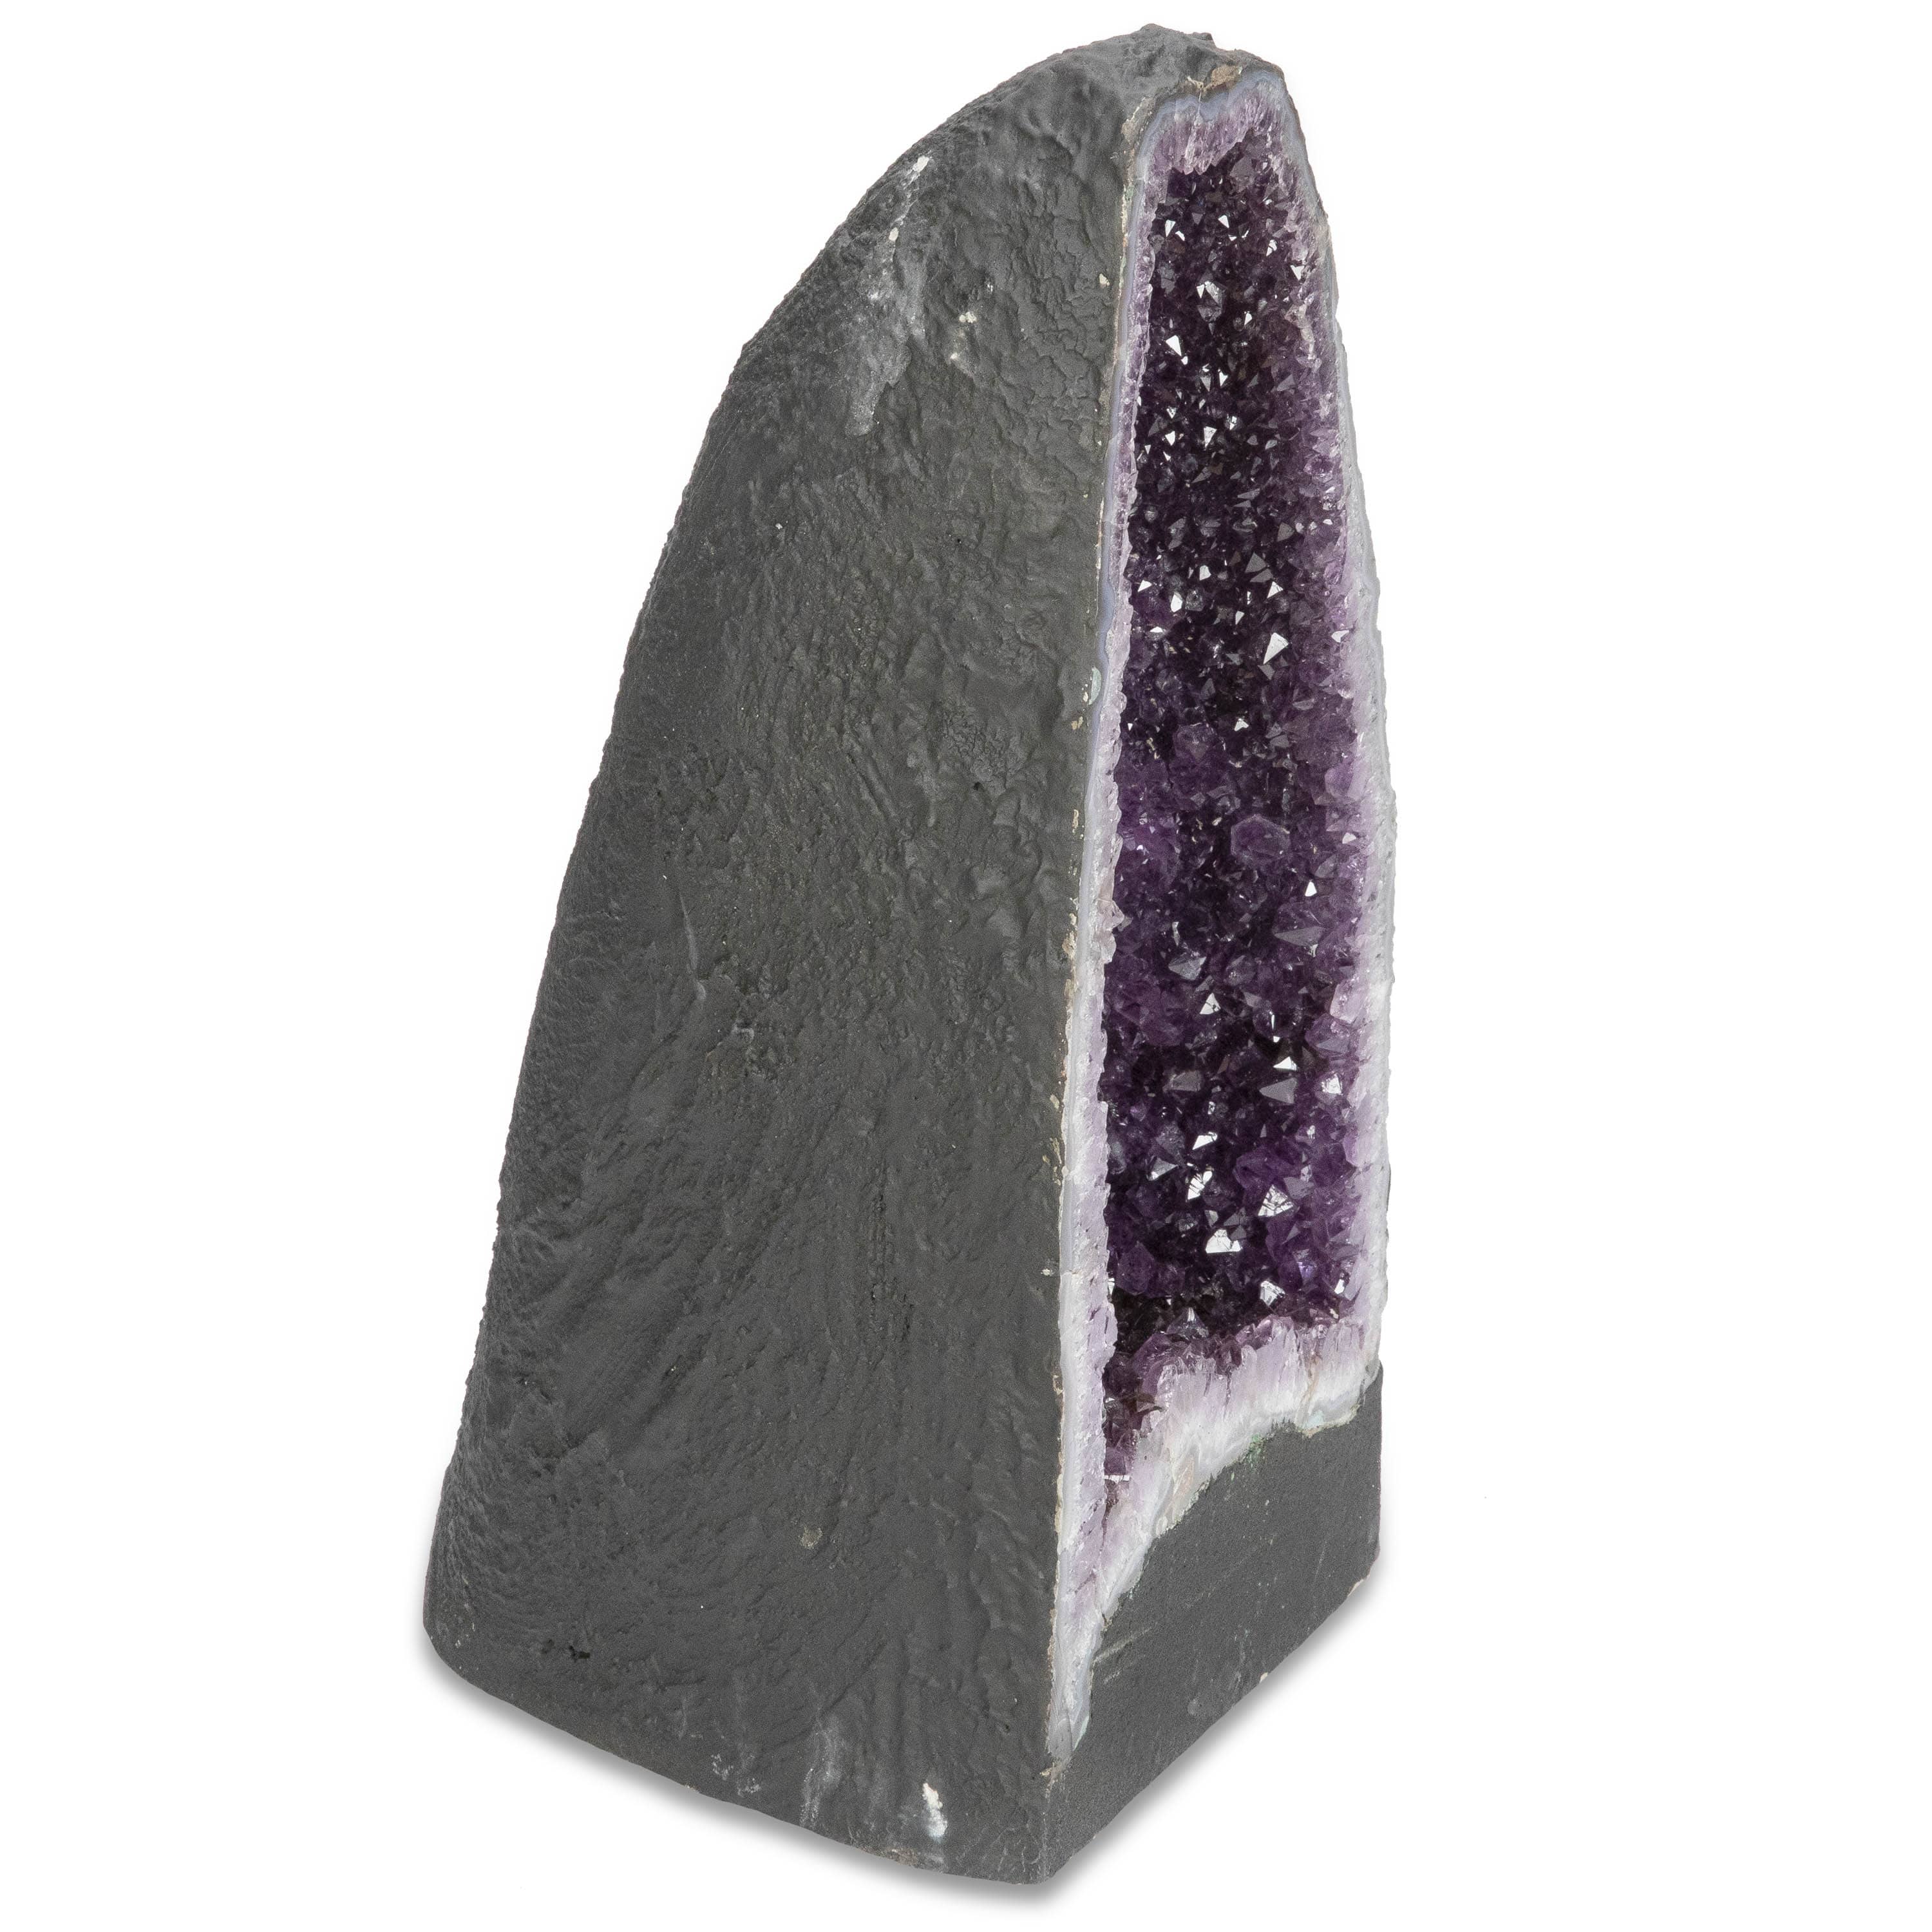 Kalifano Amethyst Amethyst Geode Cathedral - 19" / 49 lbs BAG8000.006